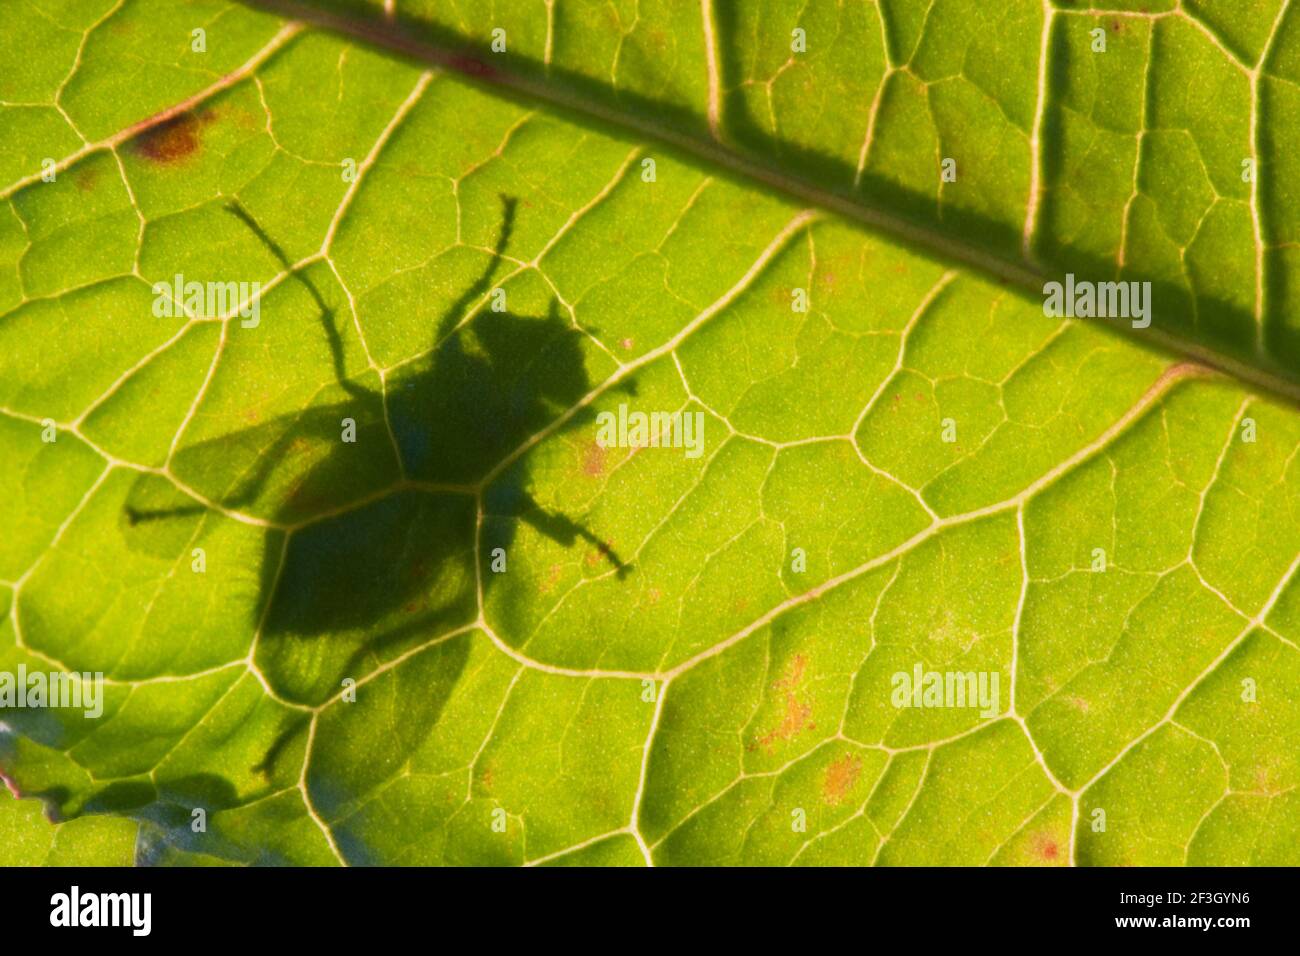 Silhouette of a fly on a sunlit leaf of Broad-leaved dock, seen from the bottom side Stock Photo